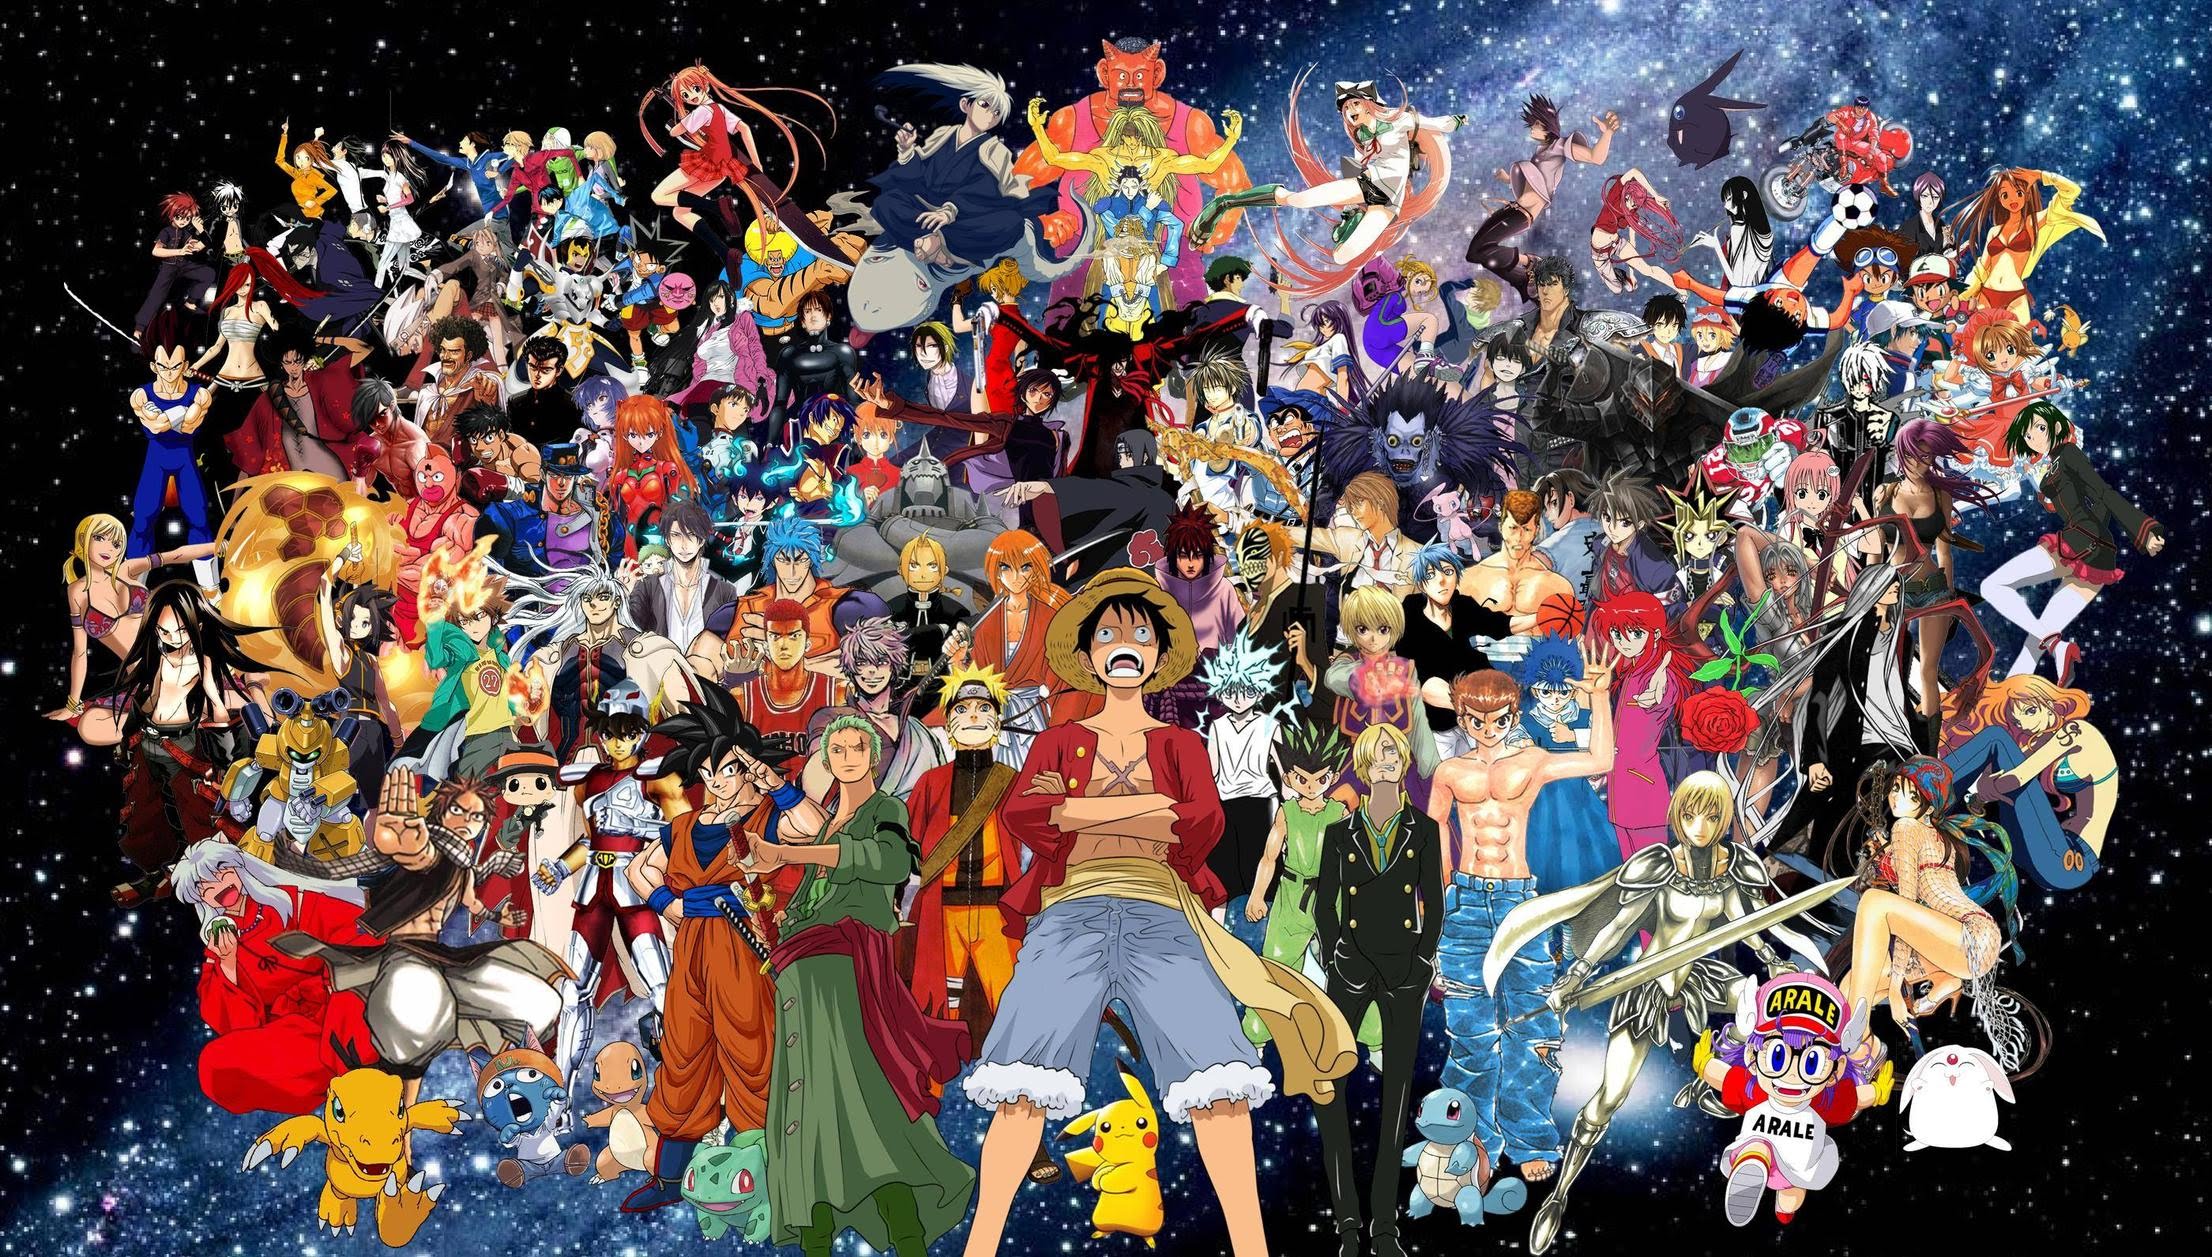 Numerous anime characters together in a large group